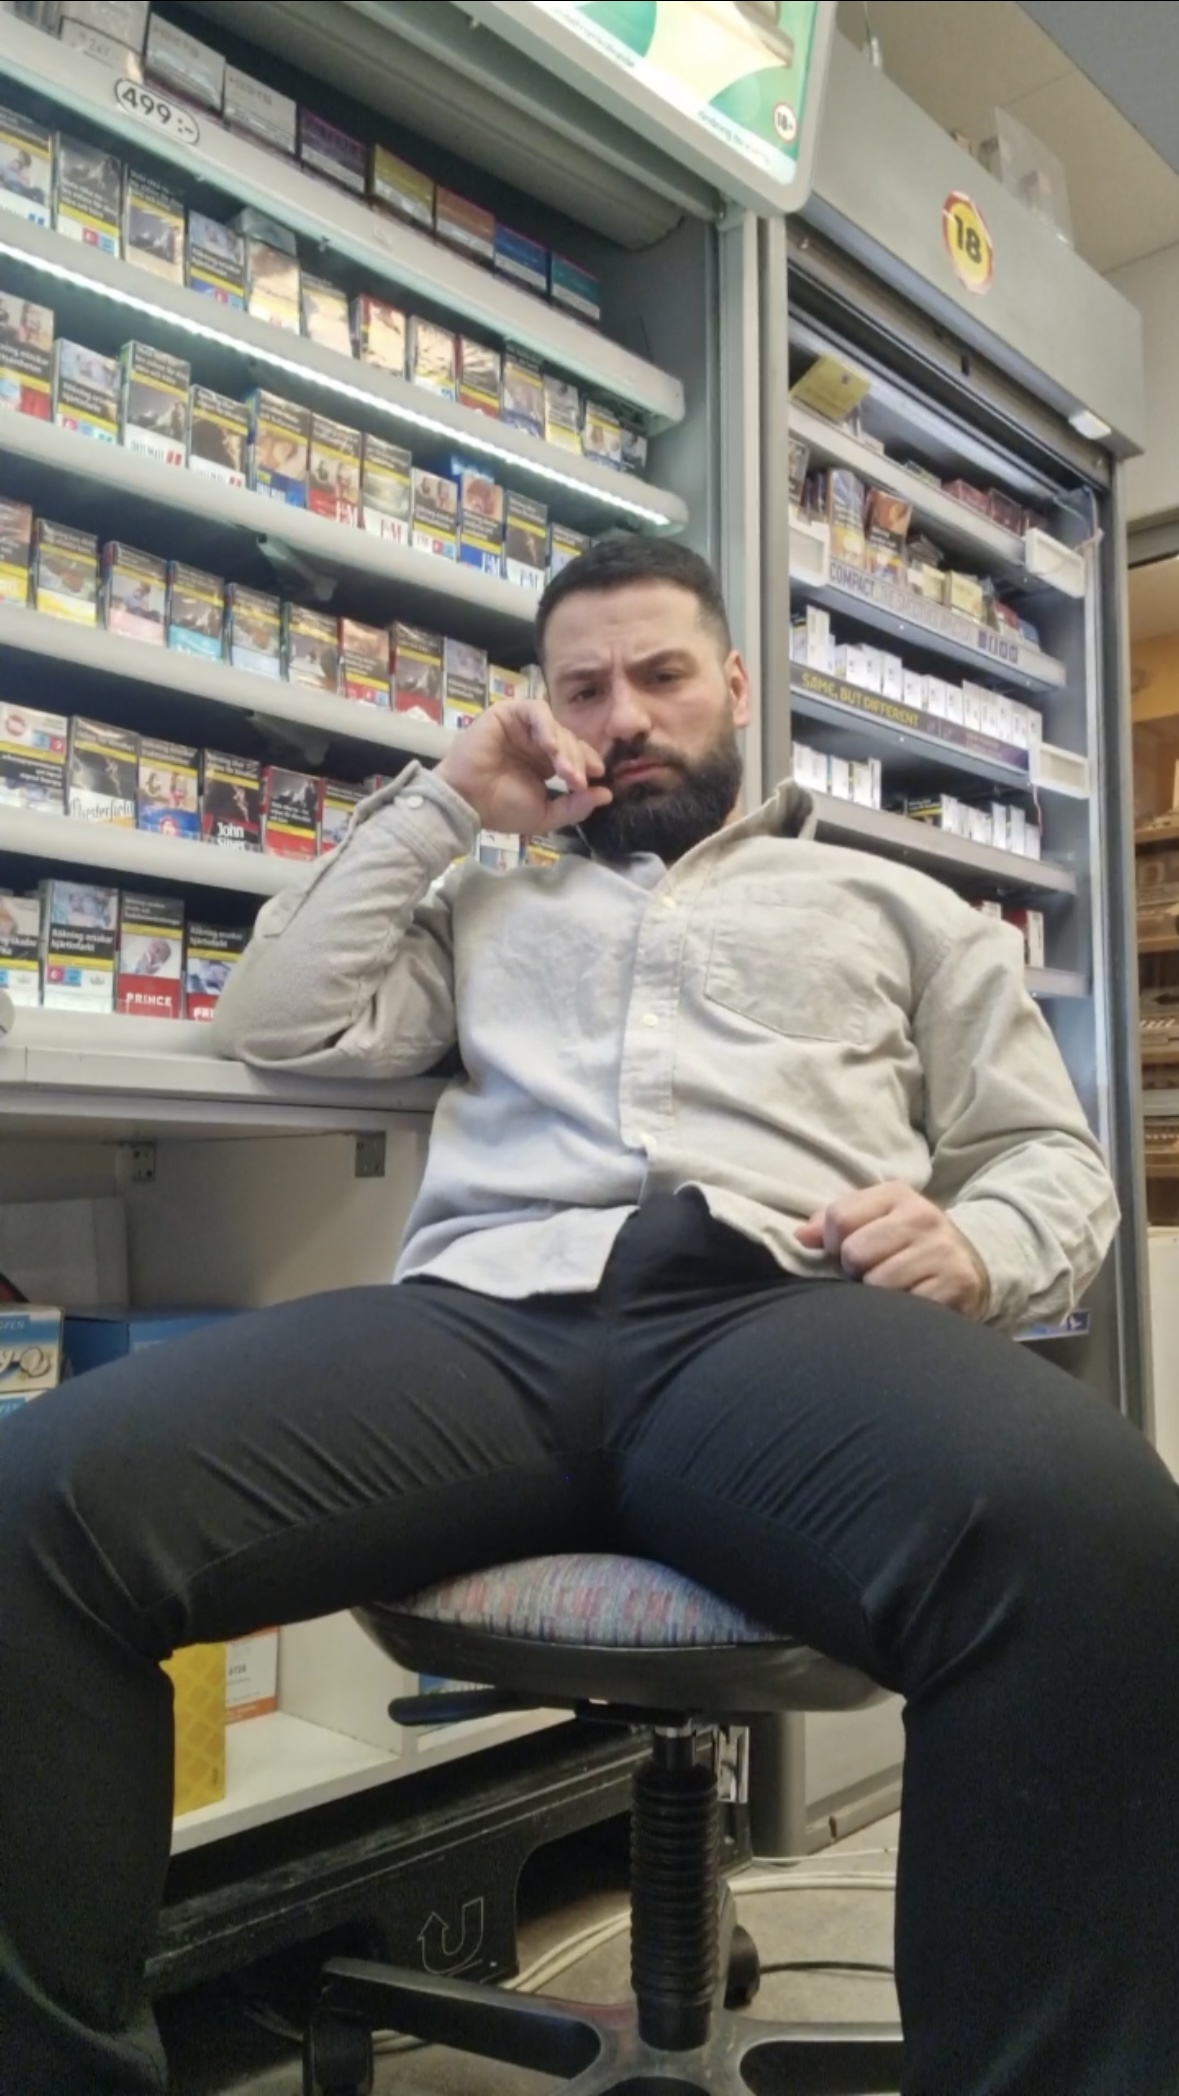 Horny DILF Recording Himself While He’s Bulging at Work